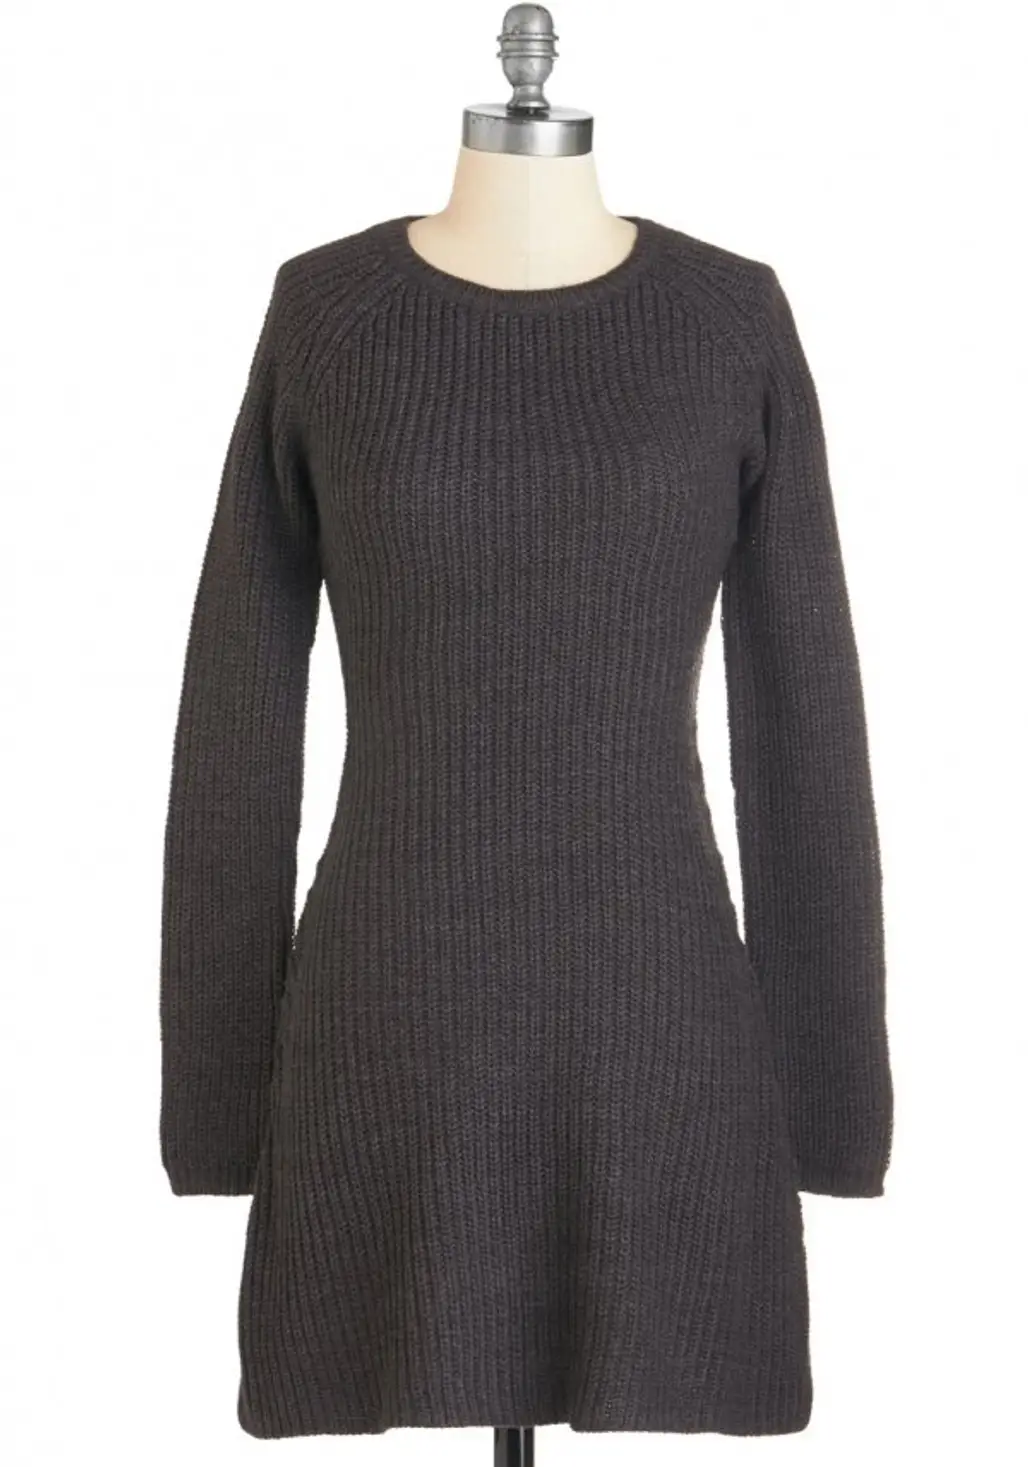 ModCloth Rustic Short Length Long Sleeve Sweater Dress Too Cozy to Call Dress